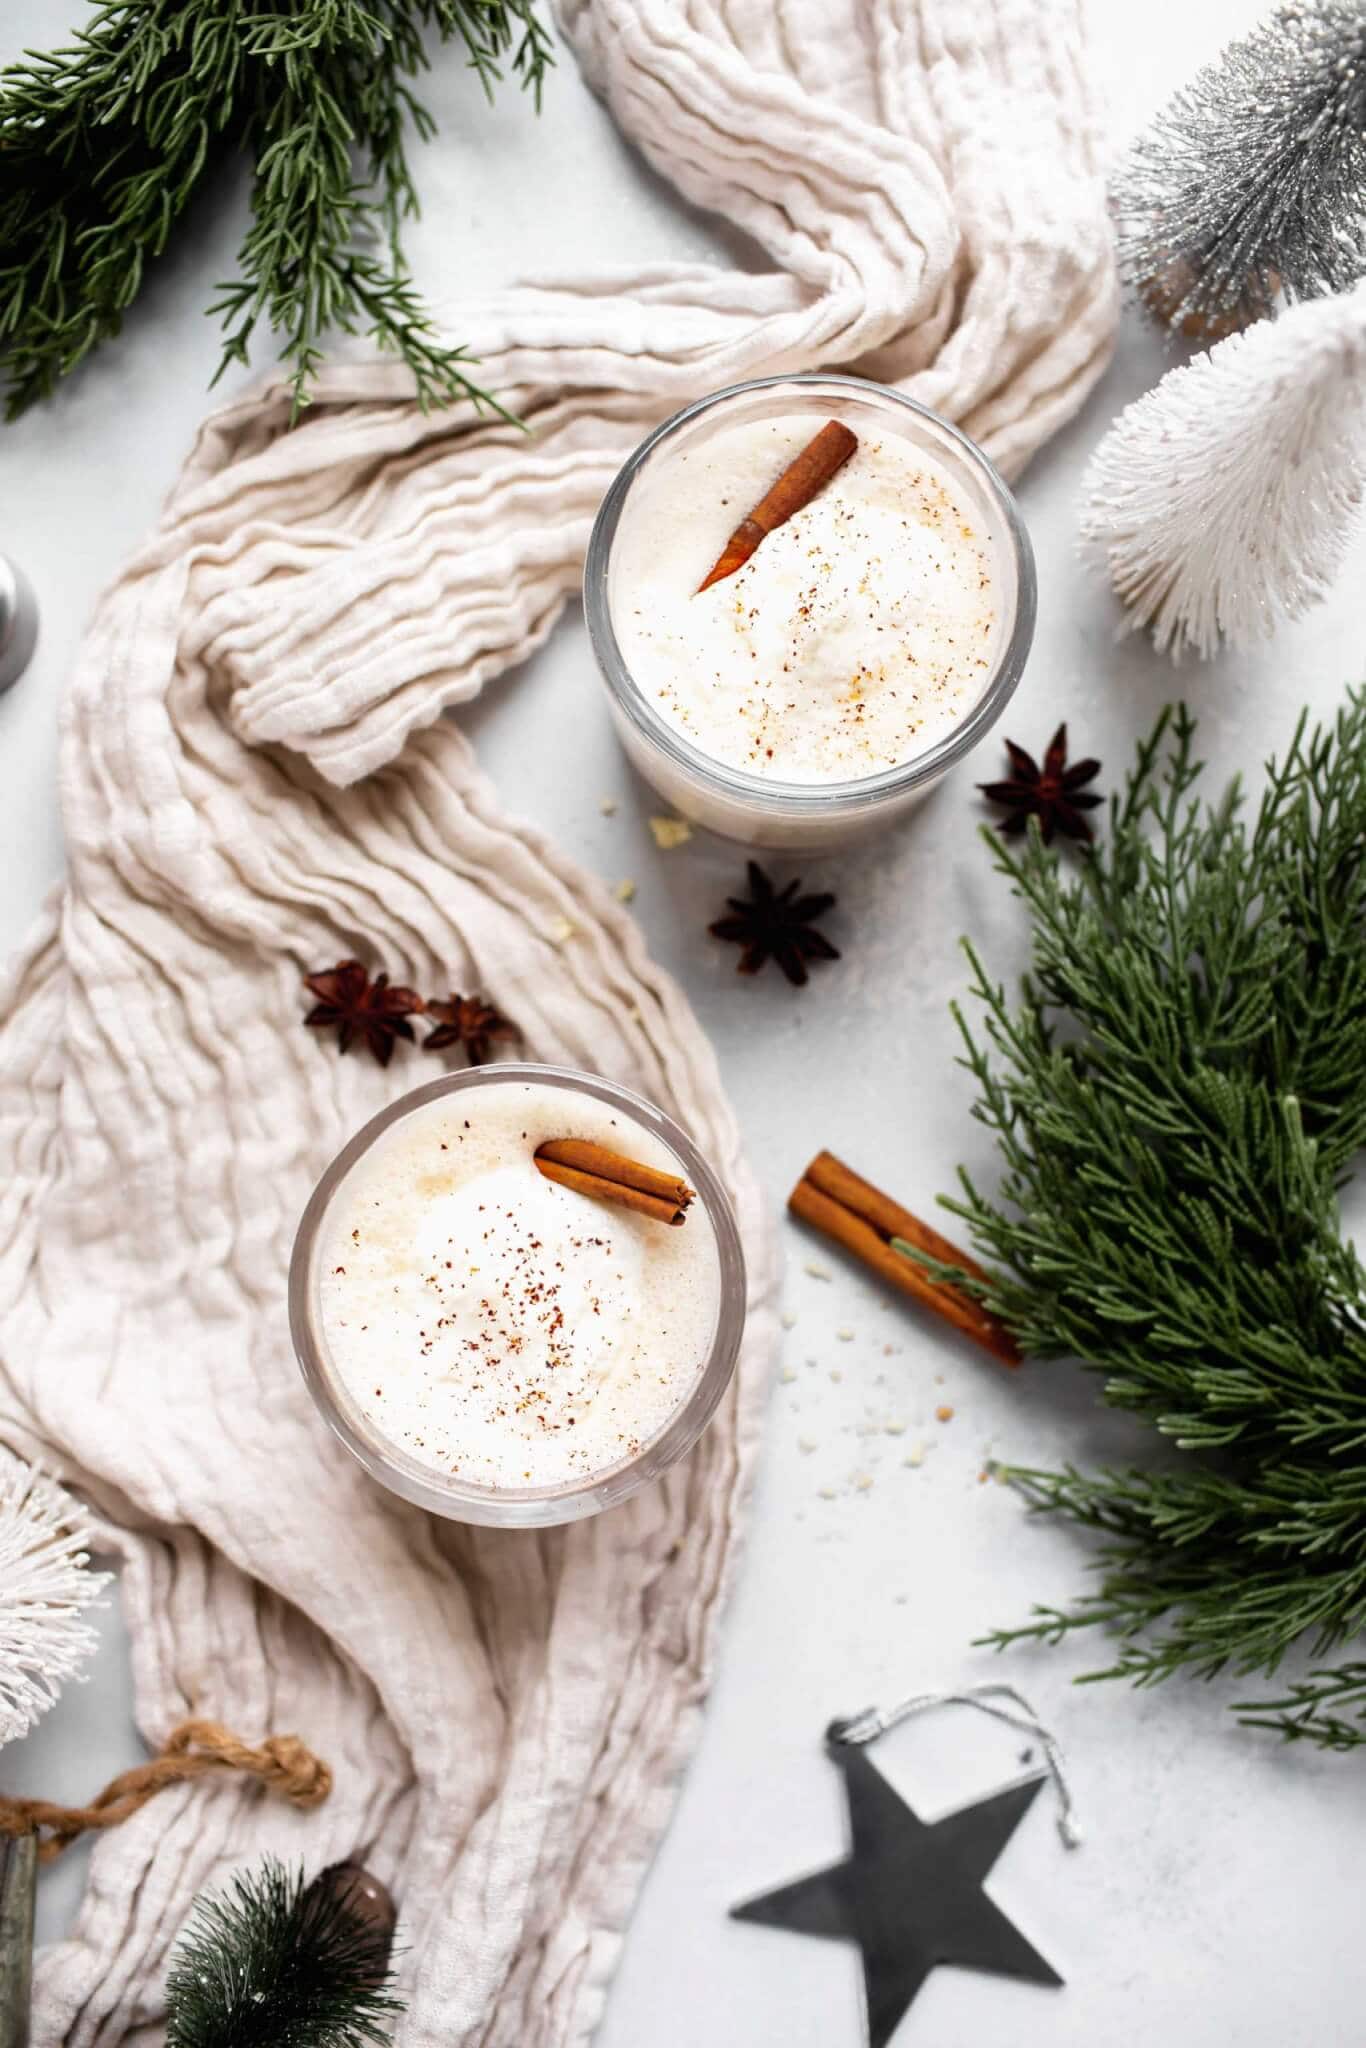 Two glasses of eggnog topped with whipped cream and sprinkle of nutmeg. Garnished with cinnamon stick. On table with christmas ornaments and greenery.